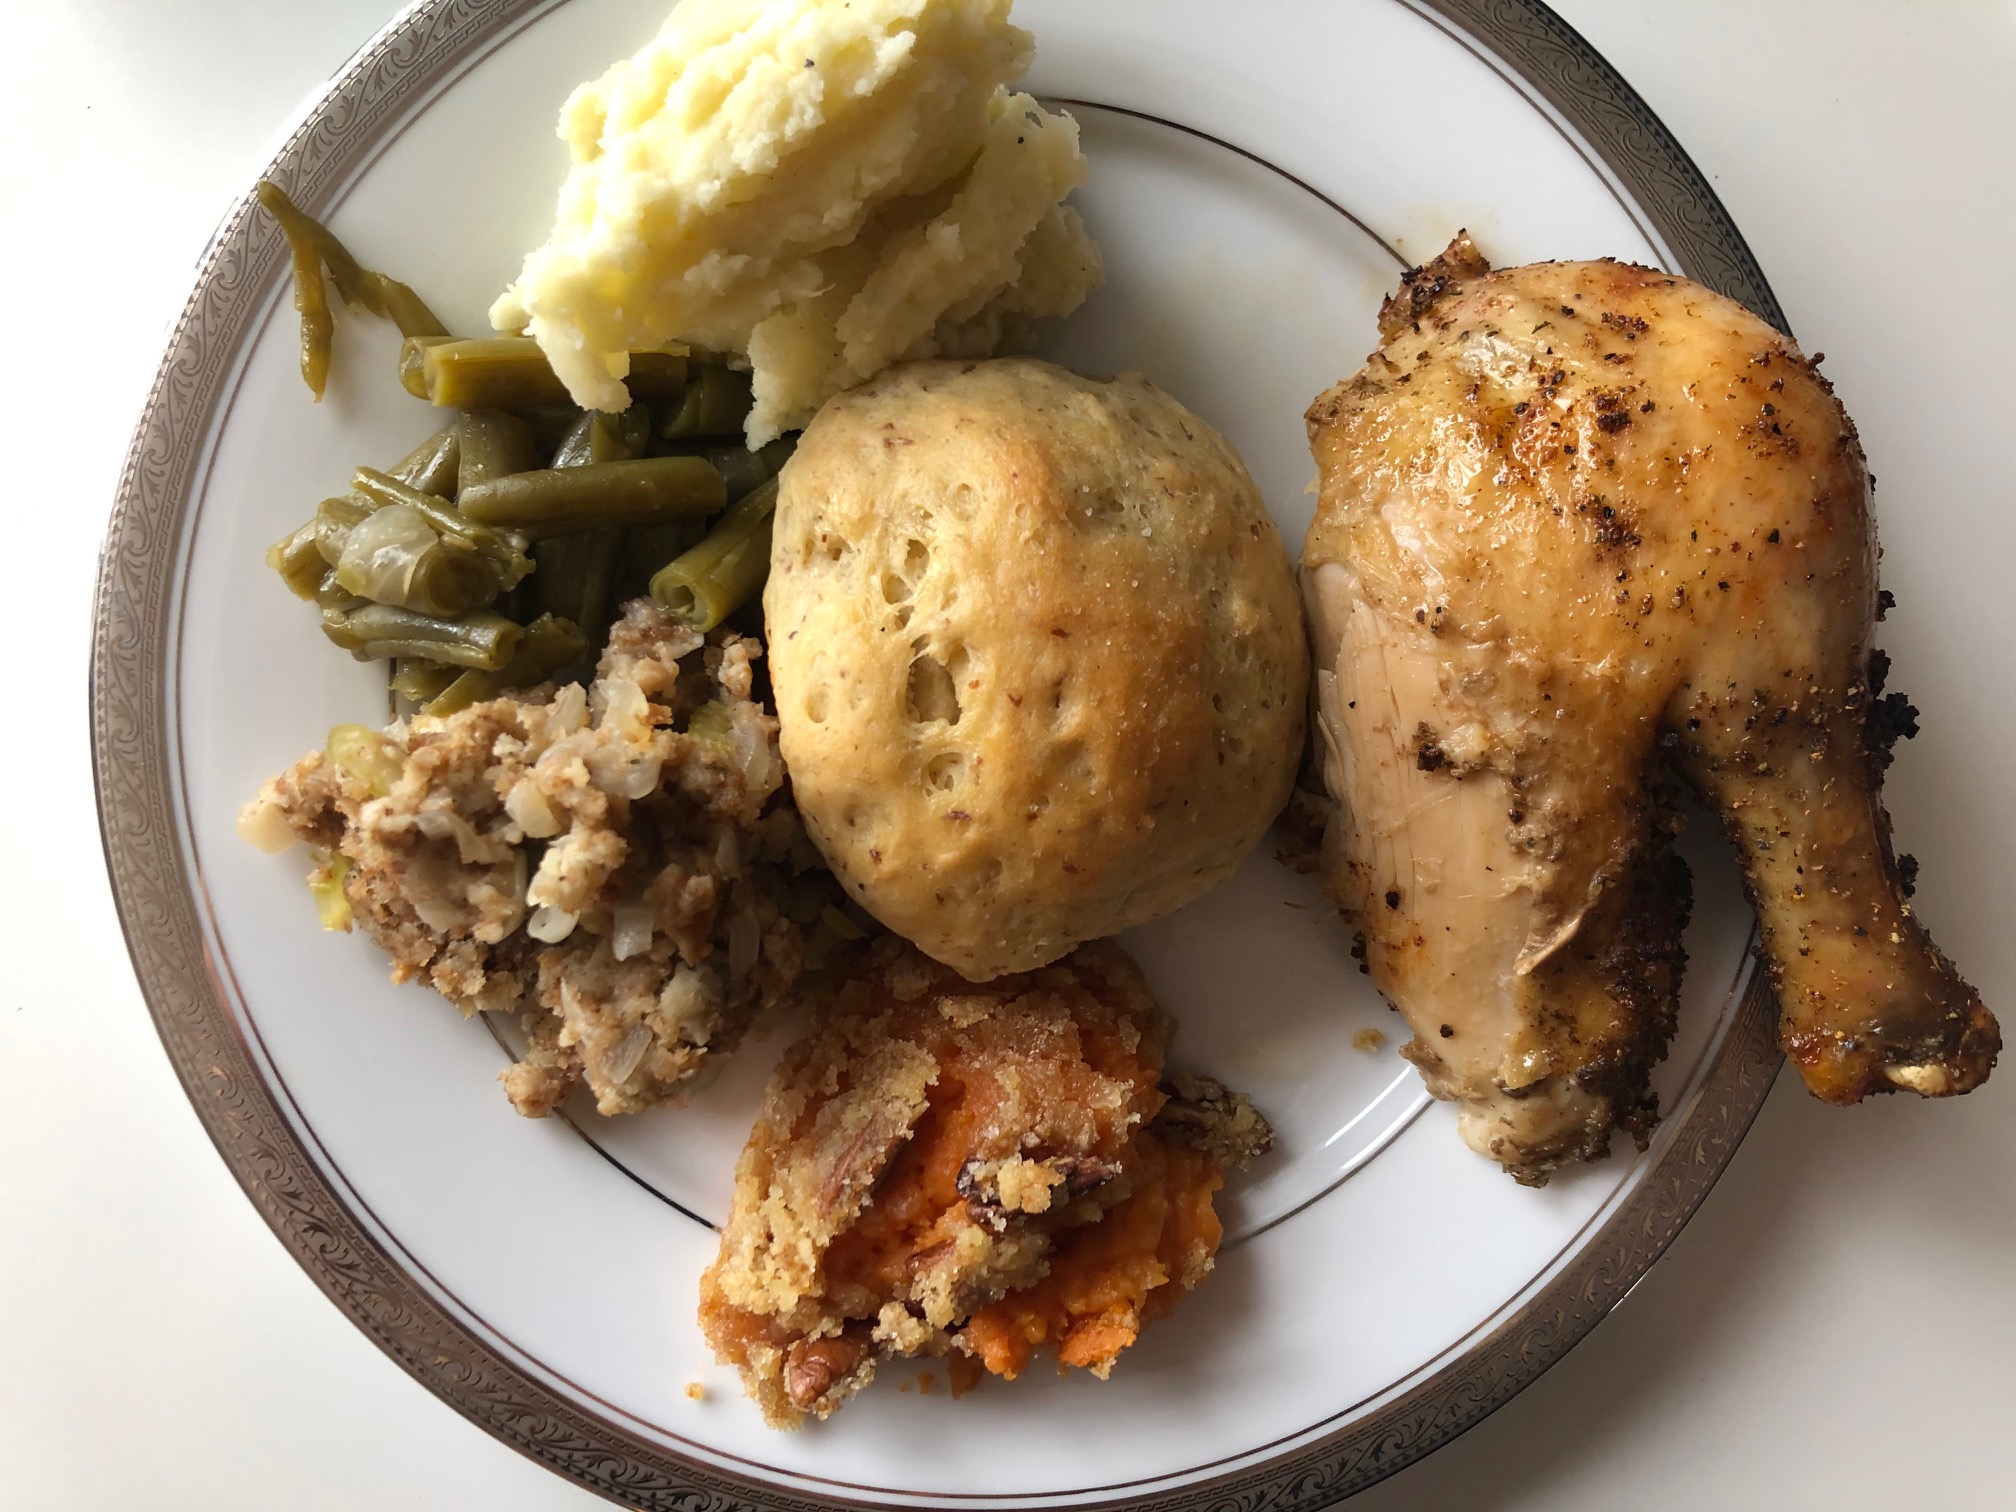 An overhead photo shows a plate of Thanksgiving food: a drumstick and thigh, a roll, stuffing, green beans, and mashed potatoes. Photo by Alyssa Buckley.